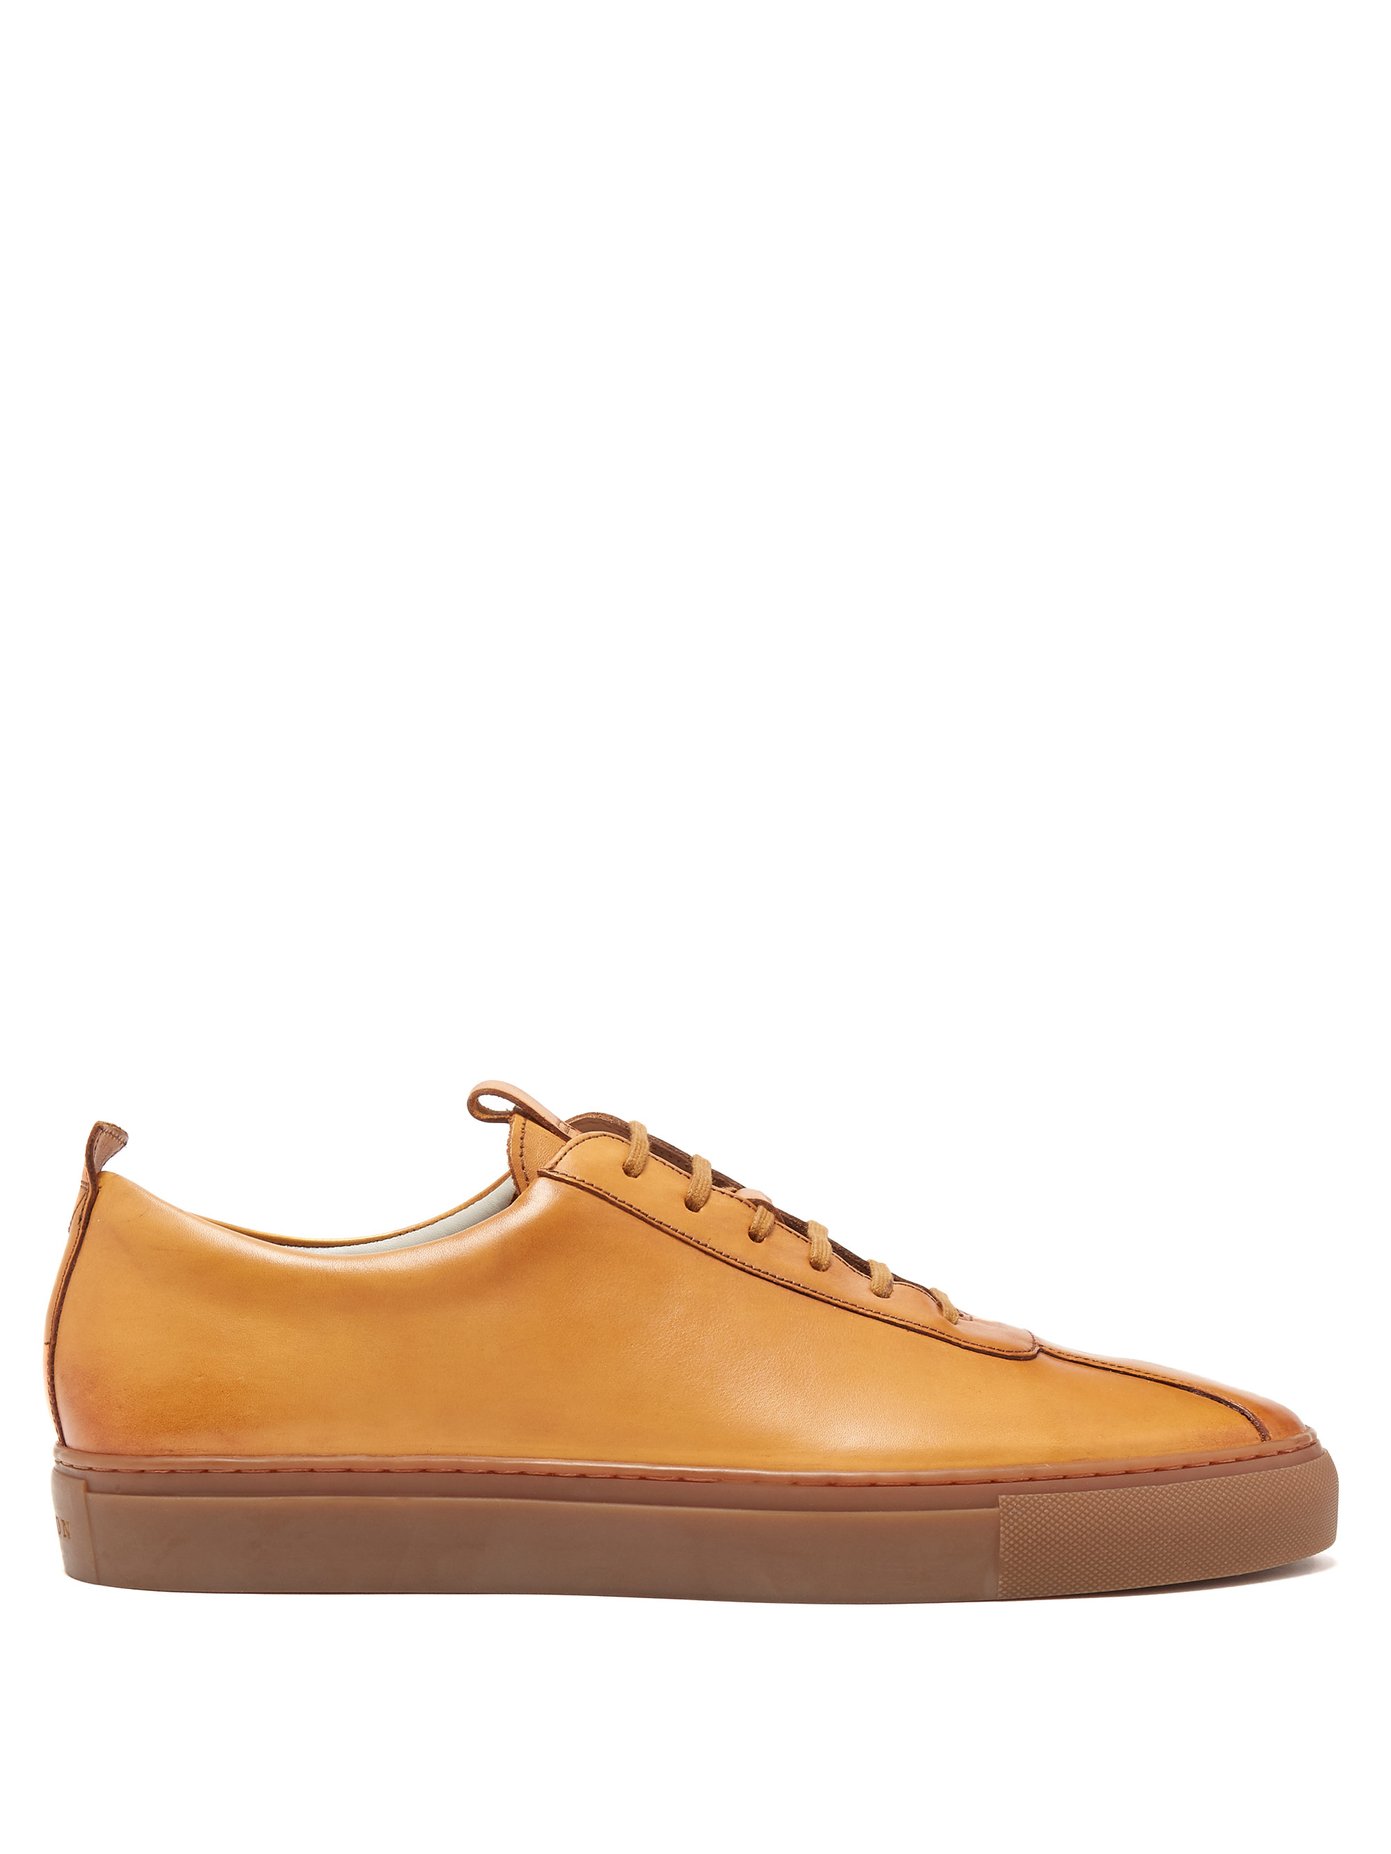 grenson leather trainers